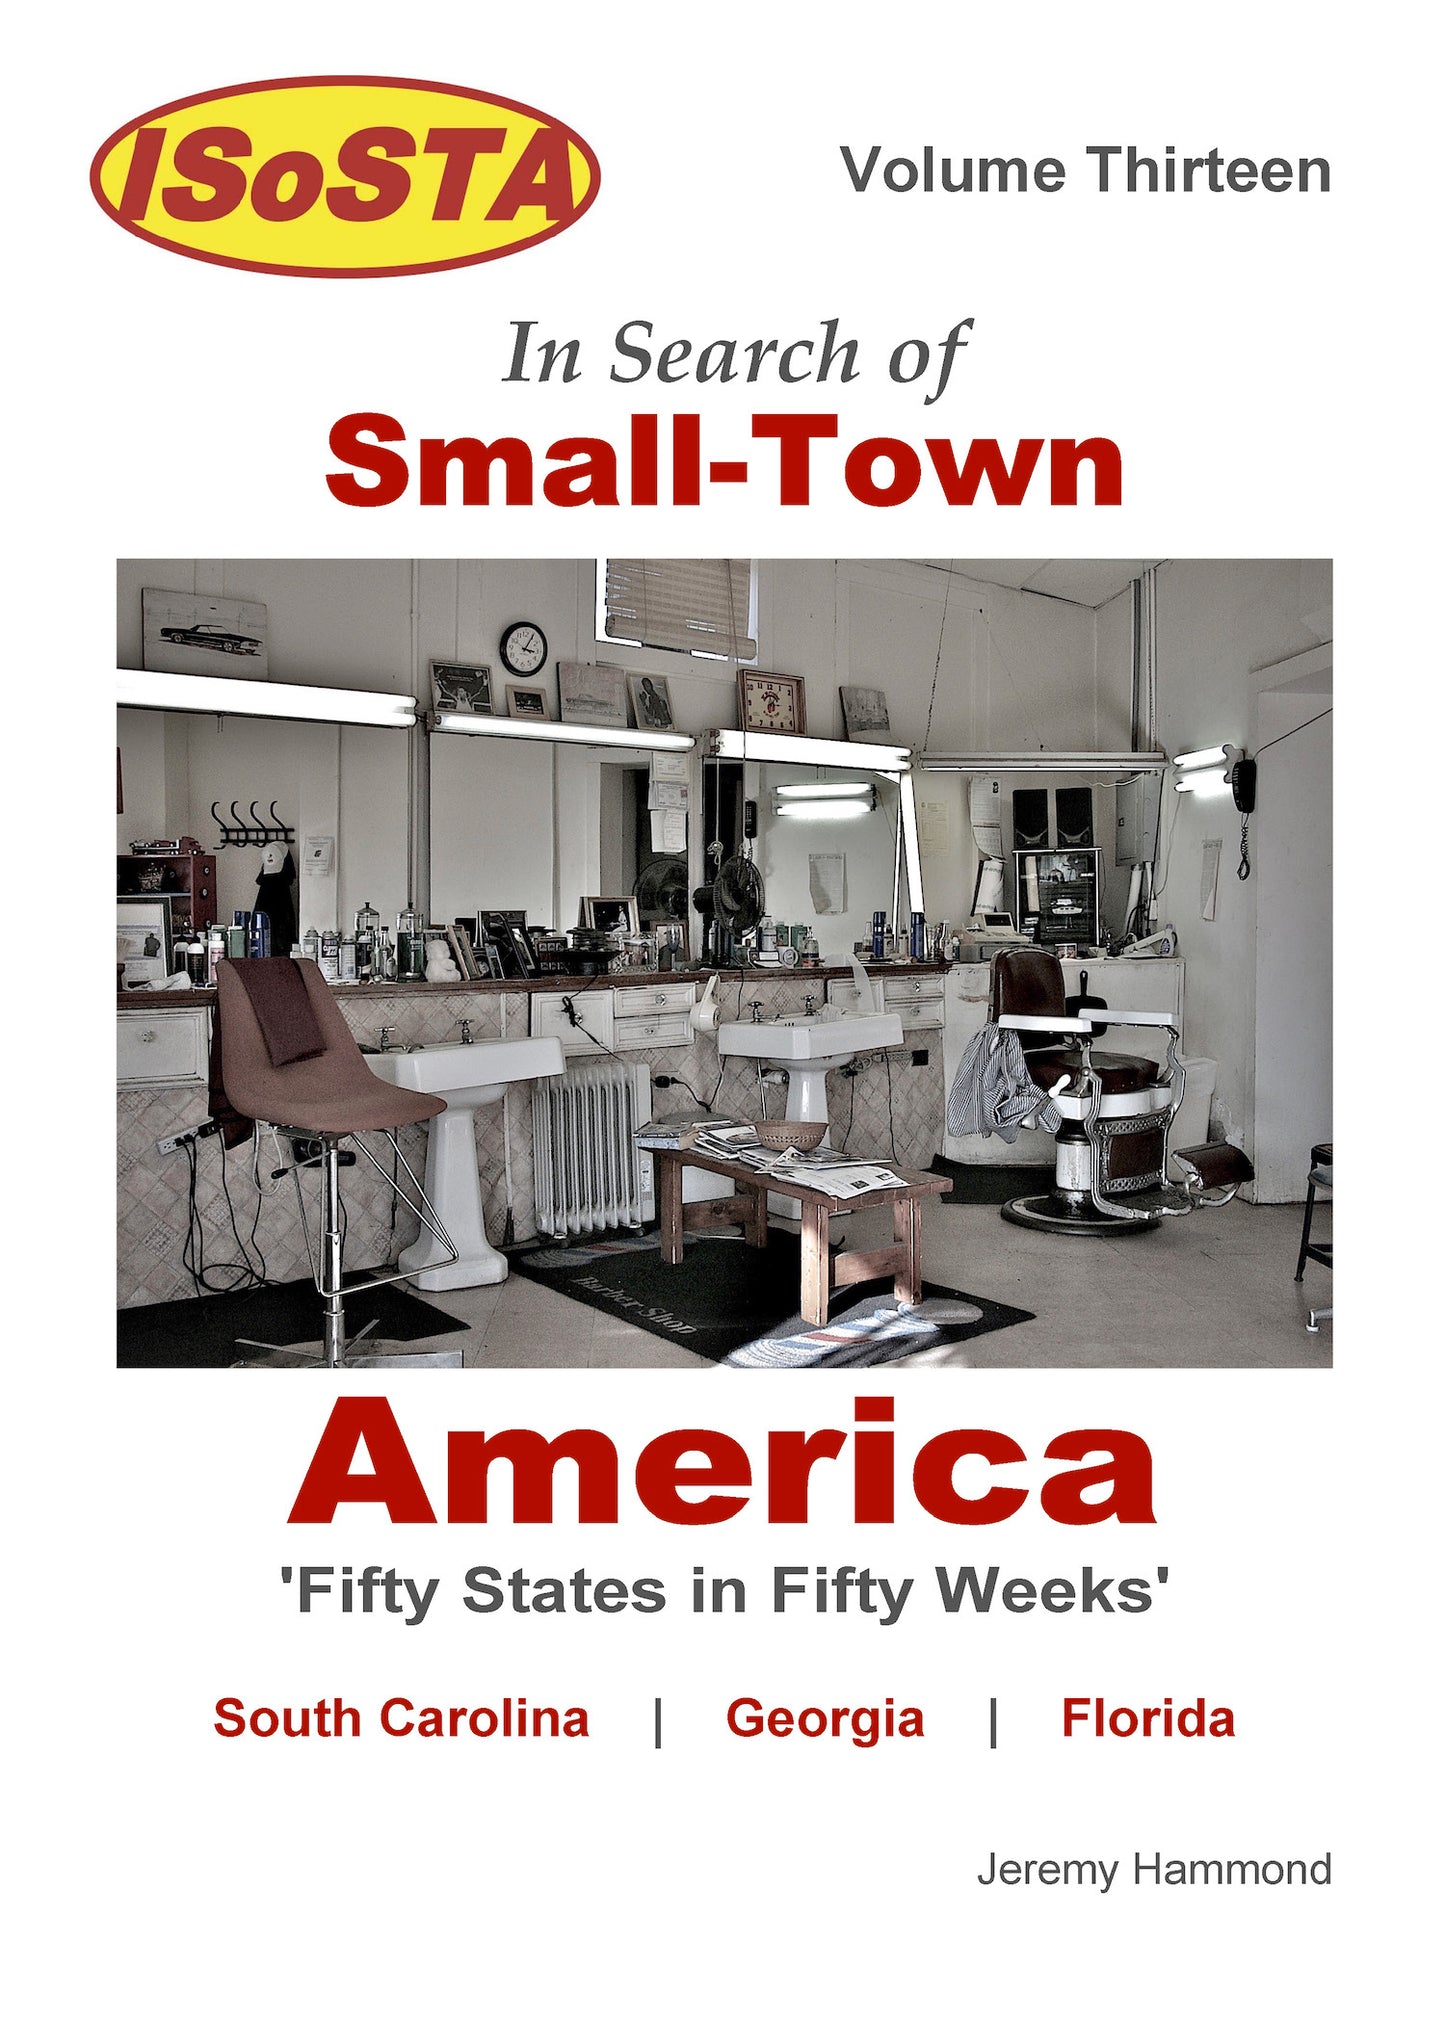 In Search of Small-Town America: Volume 13